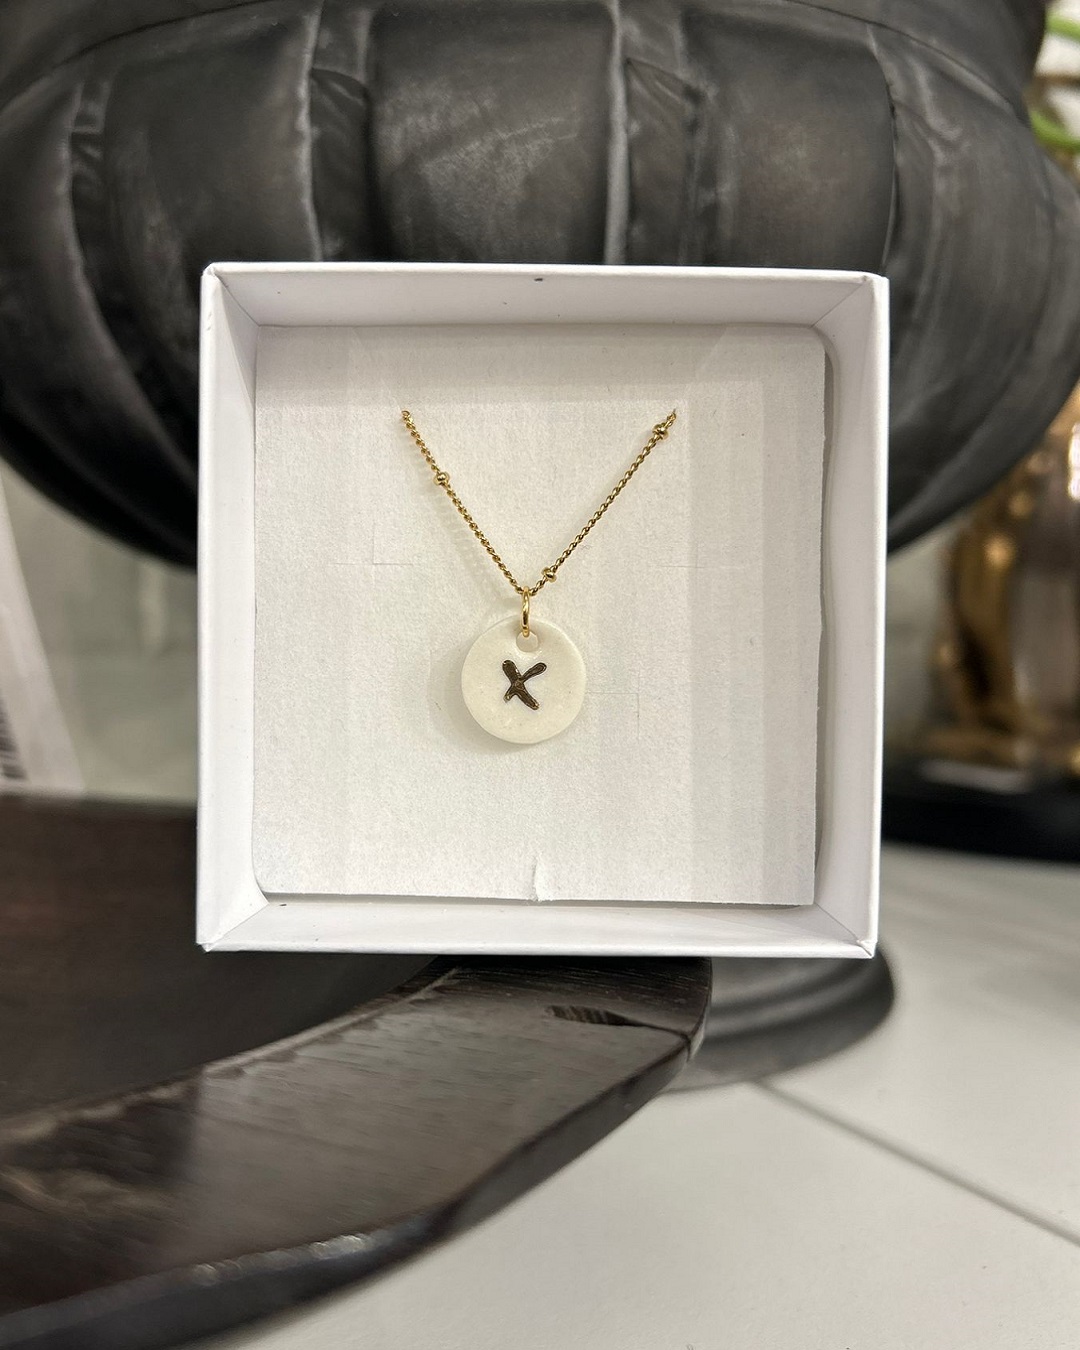 X on white disc necklace hanging in a box